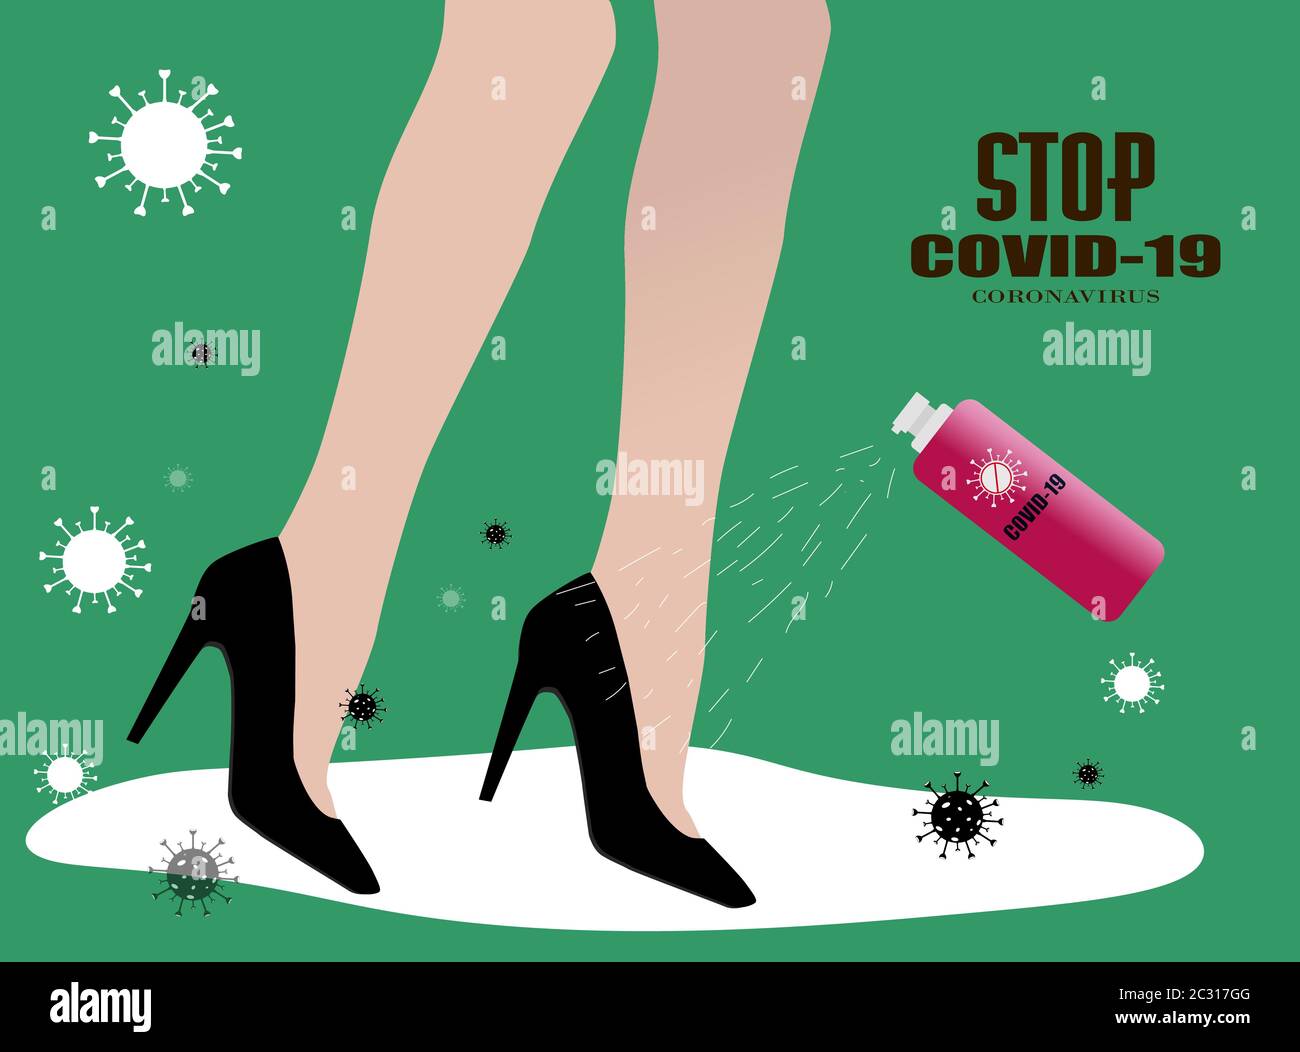 UV Light alcohol spray for cleaning pair of shoes Stock Photo - Alamy